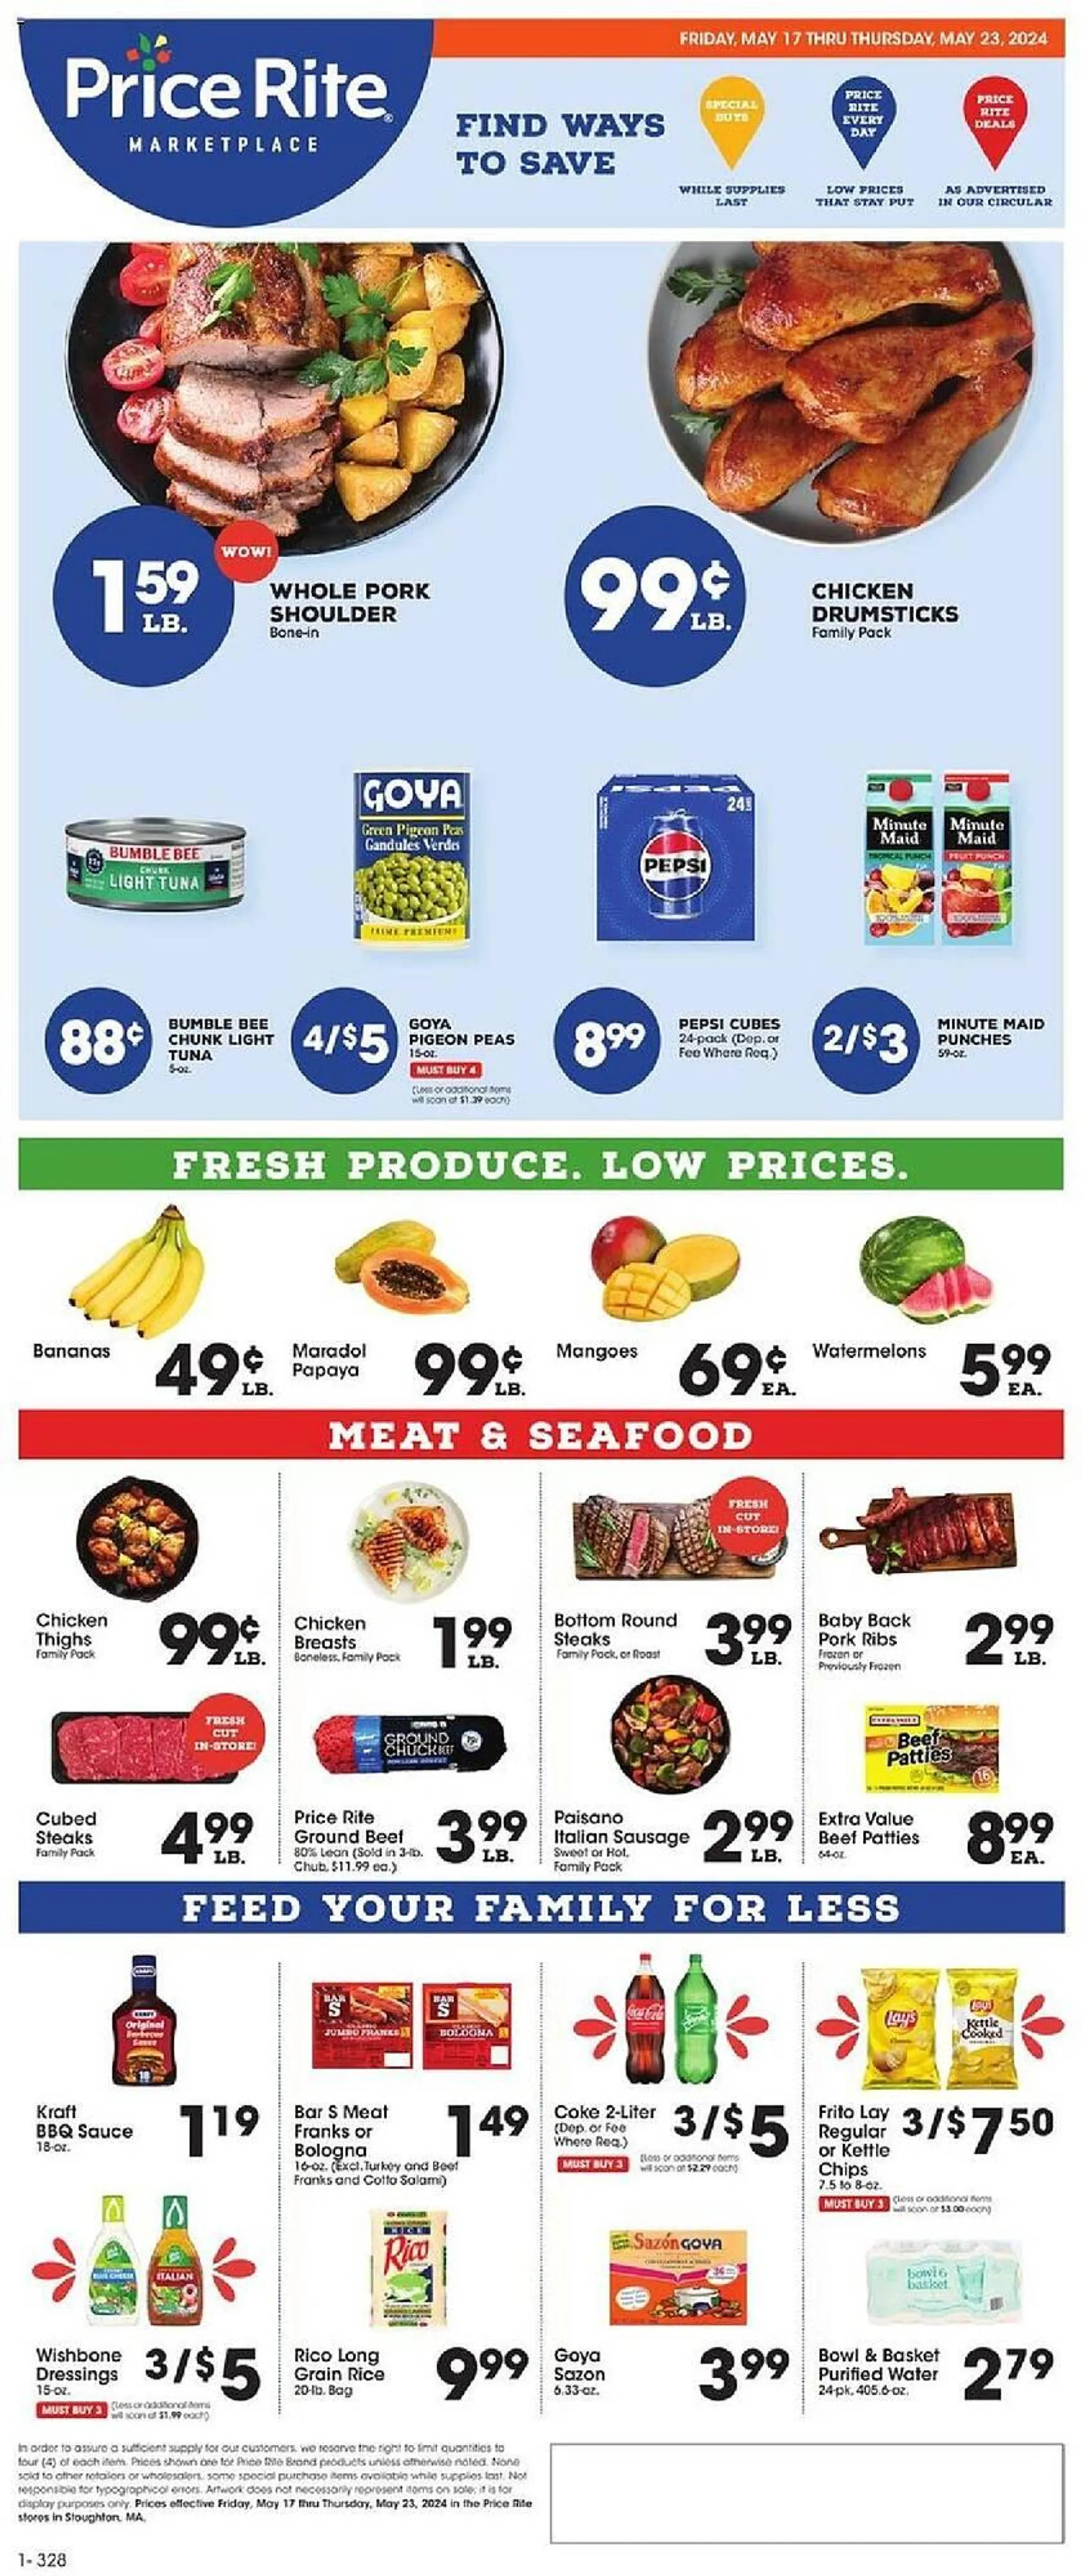 Price Rite Weekly Ad - 1